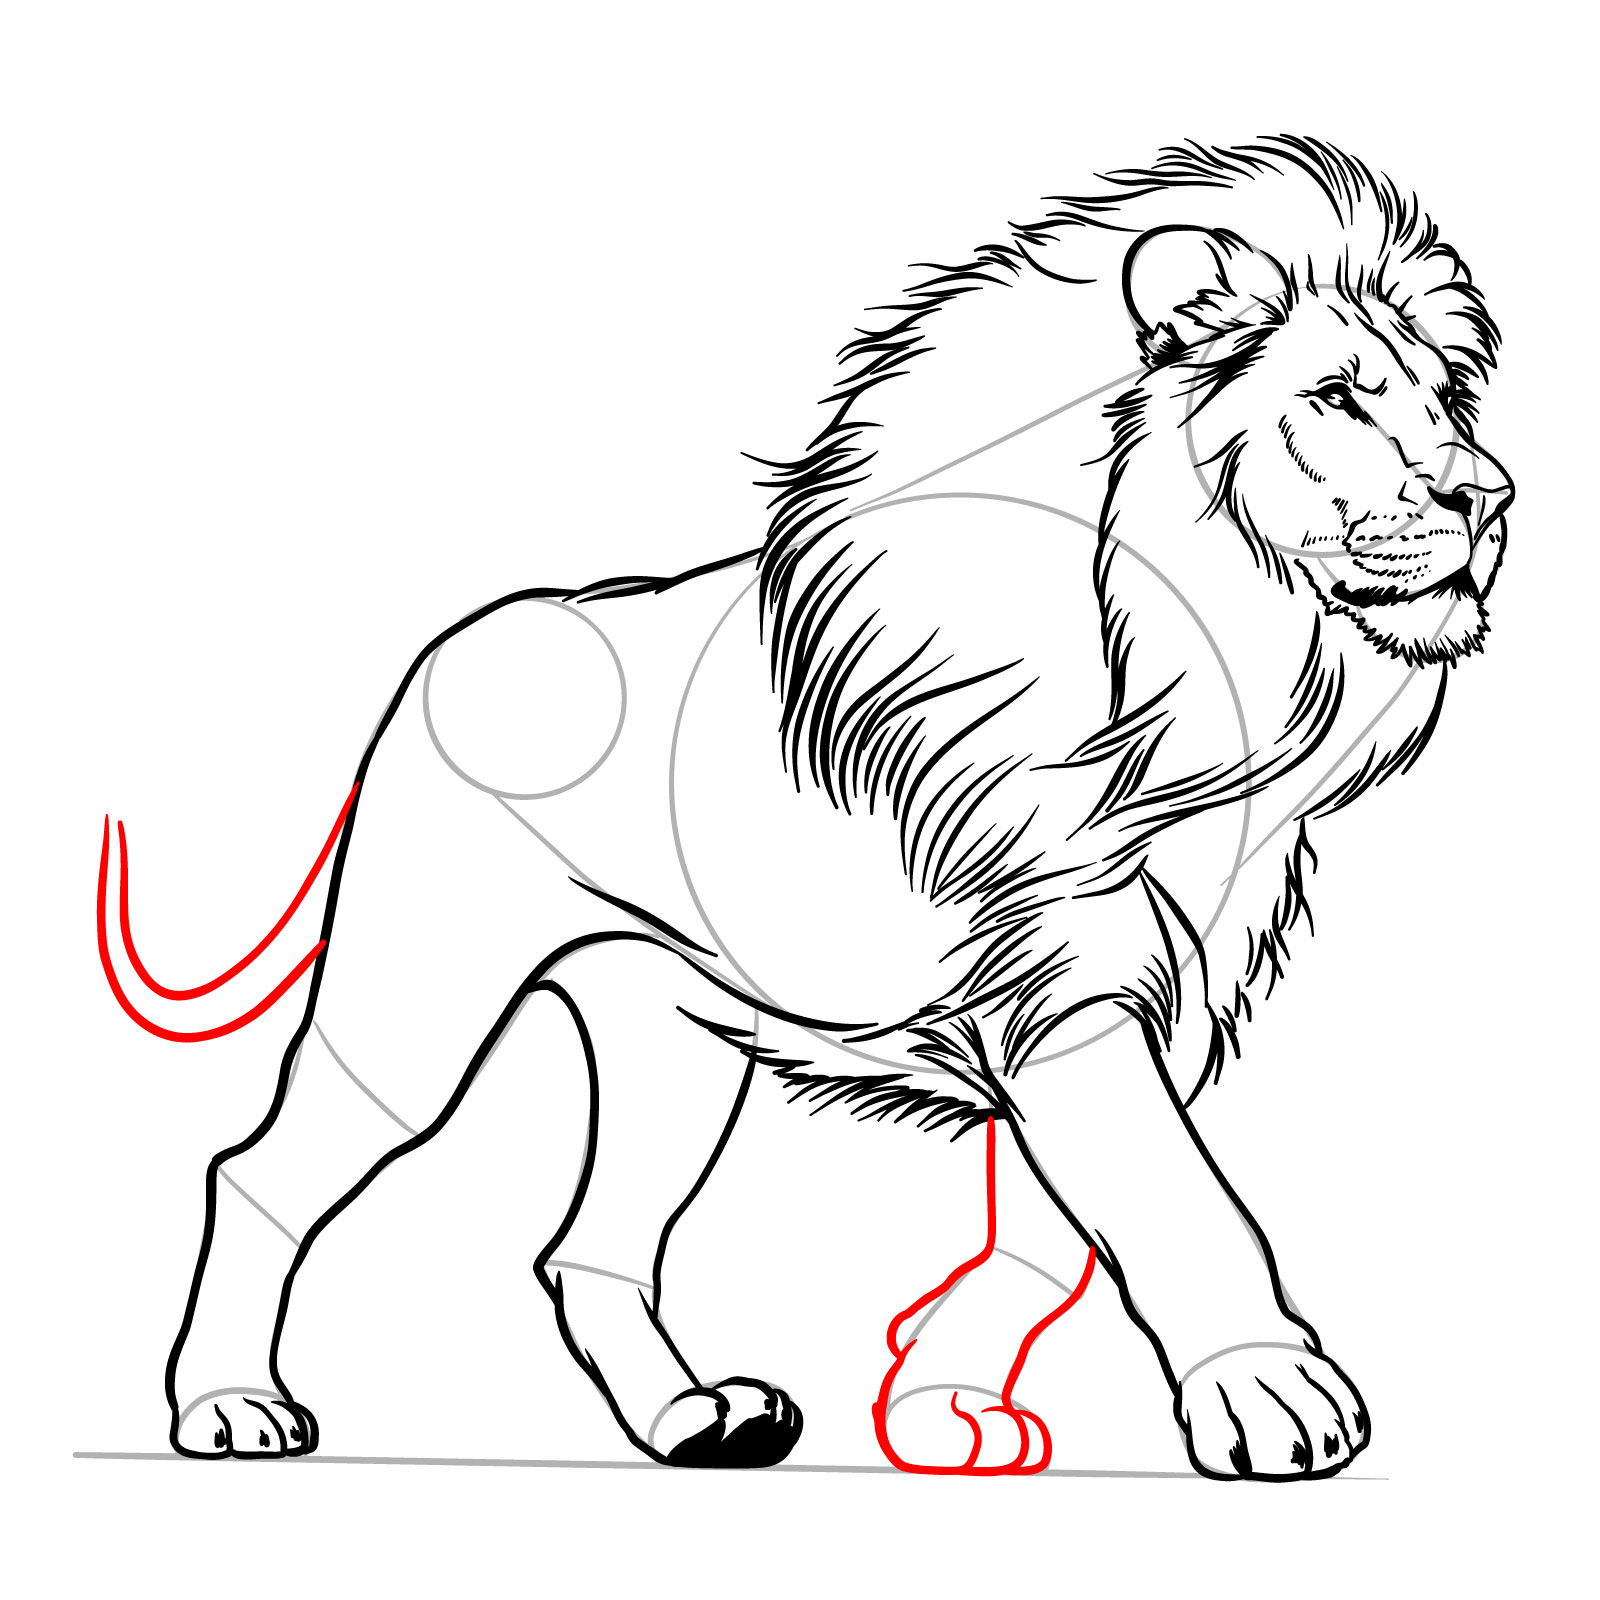 Walking lion drawing with front left leg and tail details - step 14